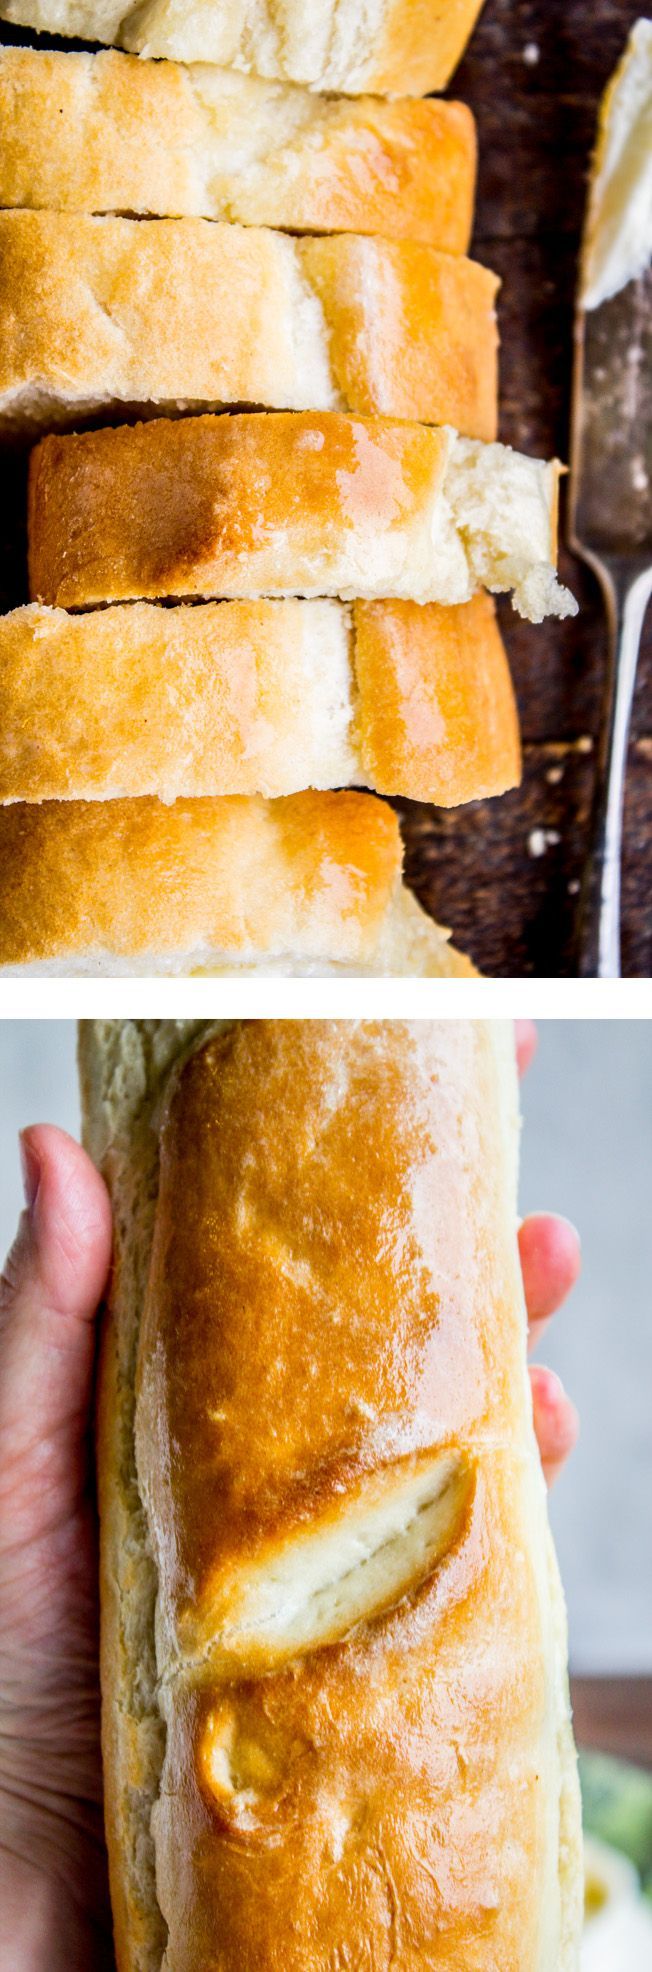 One Hour French Bread from The Food Charlatan. One hour, I promise!! This delicious yeasty French bread has only one 20-minute